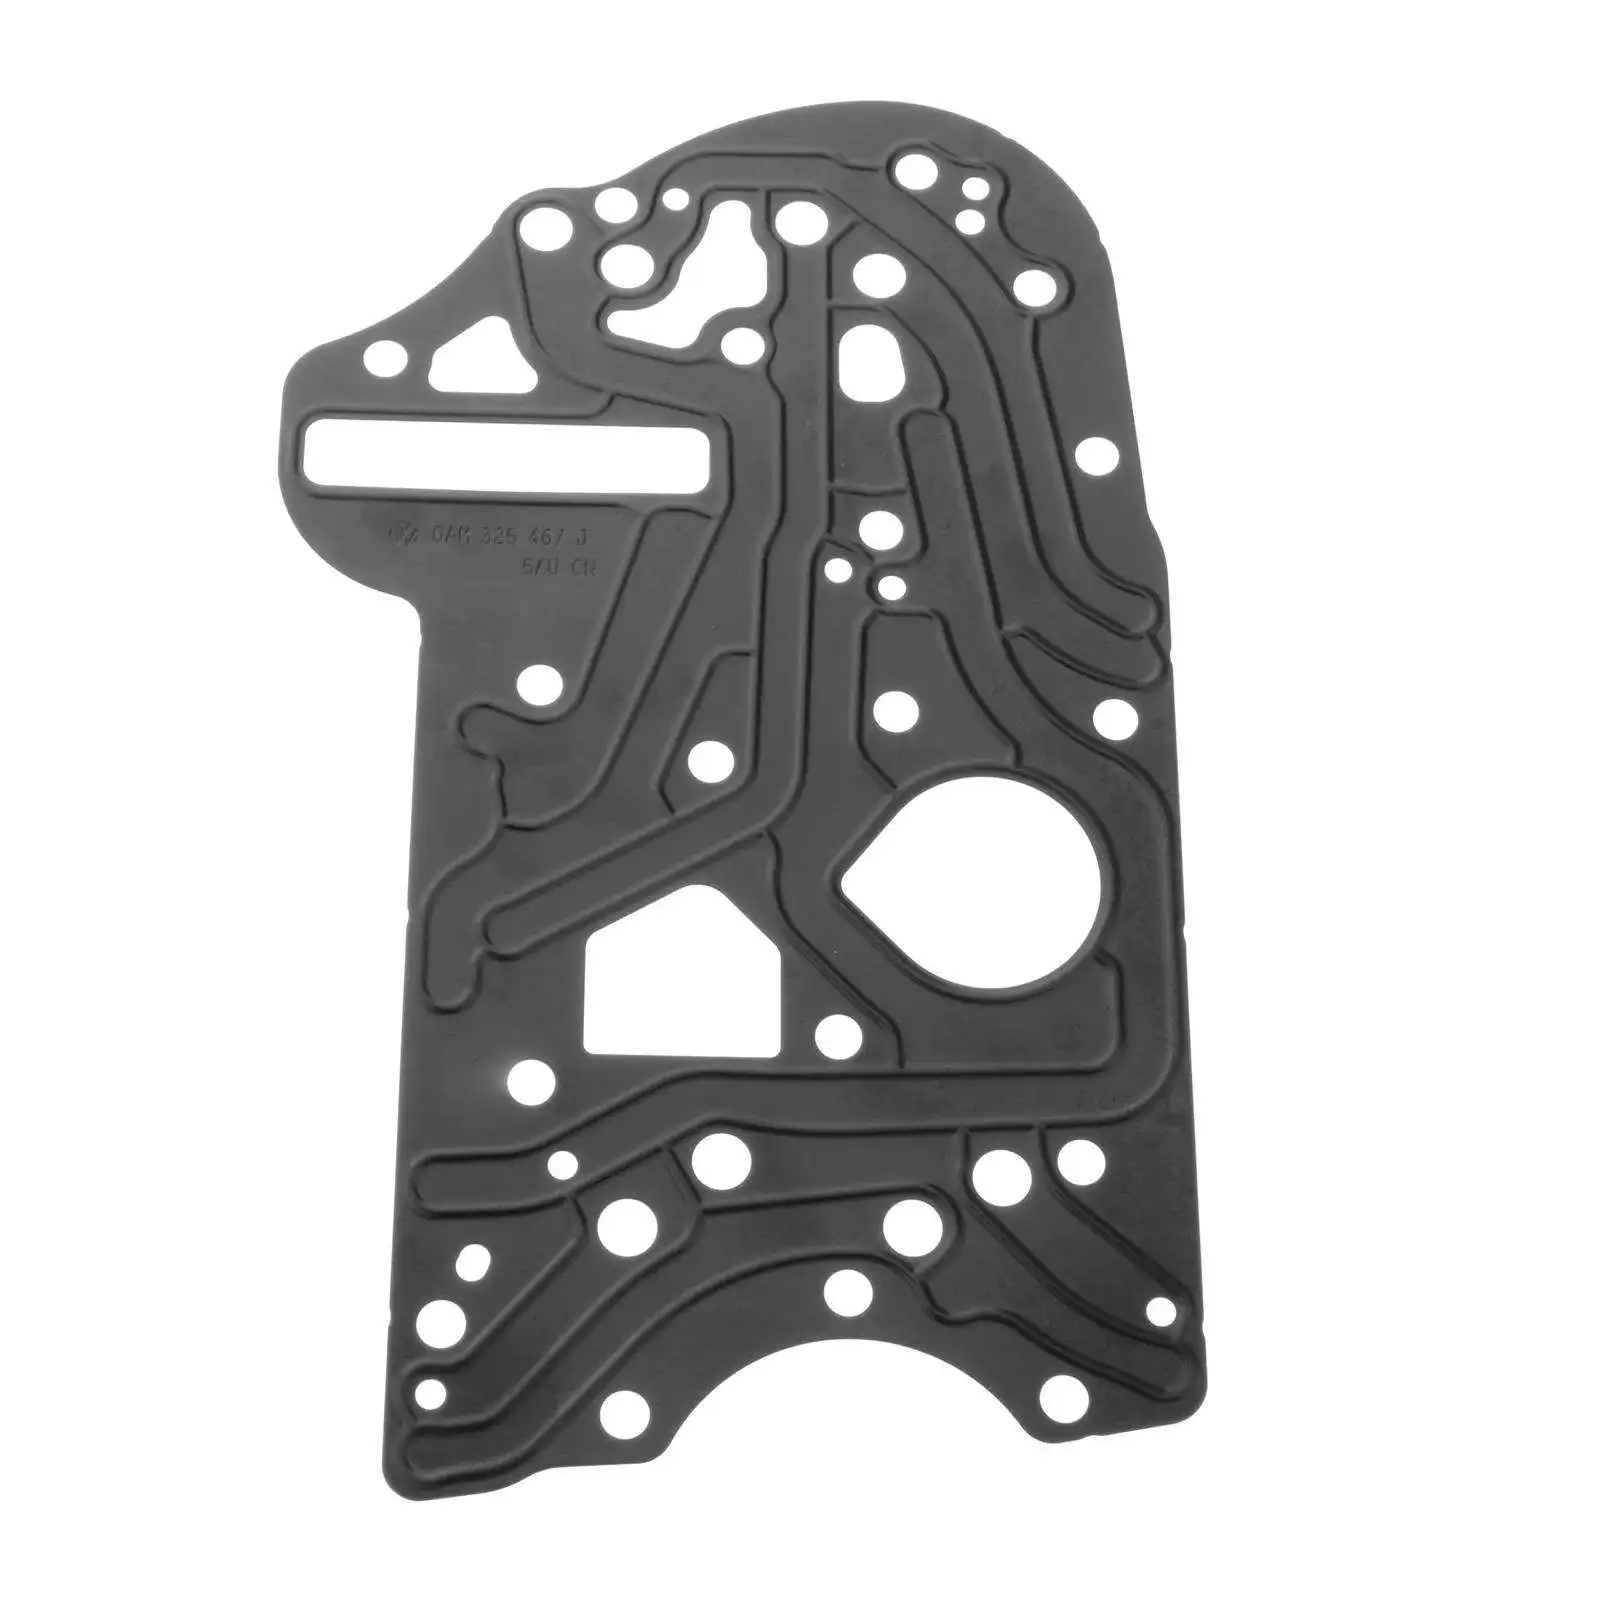 0AM DQ200 Aluminum Transmission Valve Body Plate Gasket for VW for Sagitar for Golf 965747A Stable & Reliable